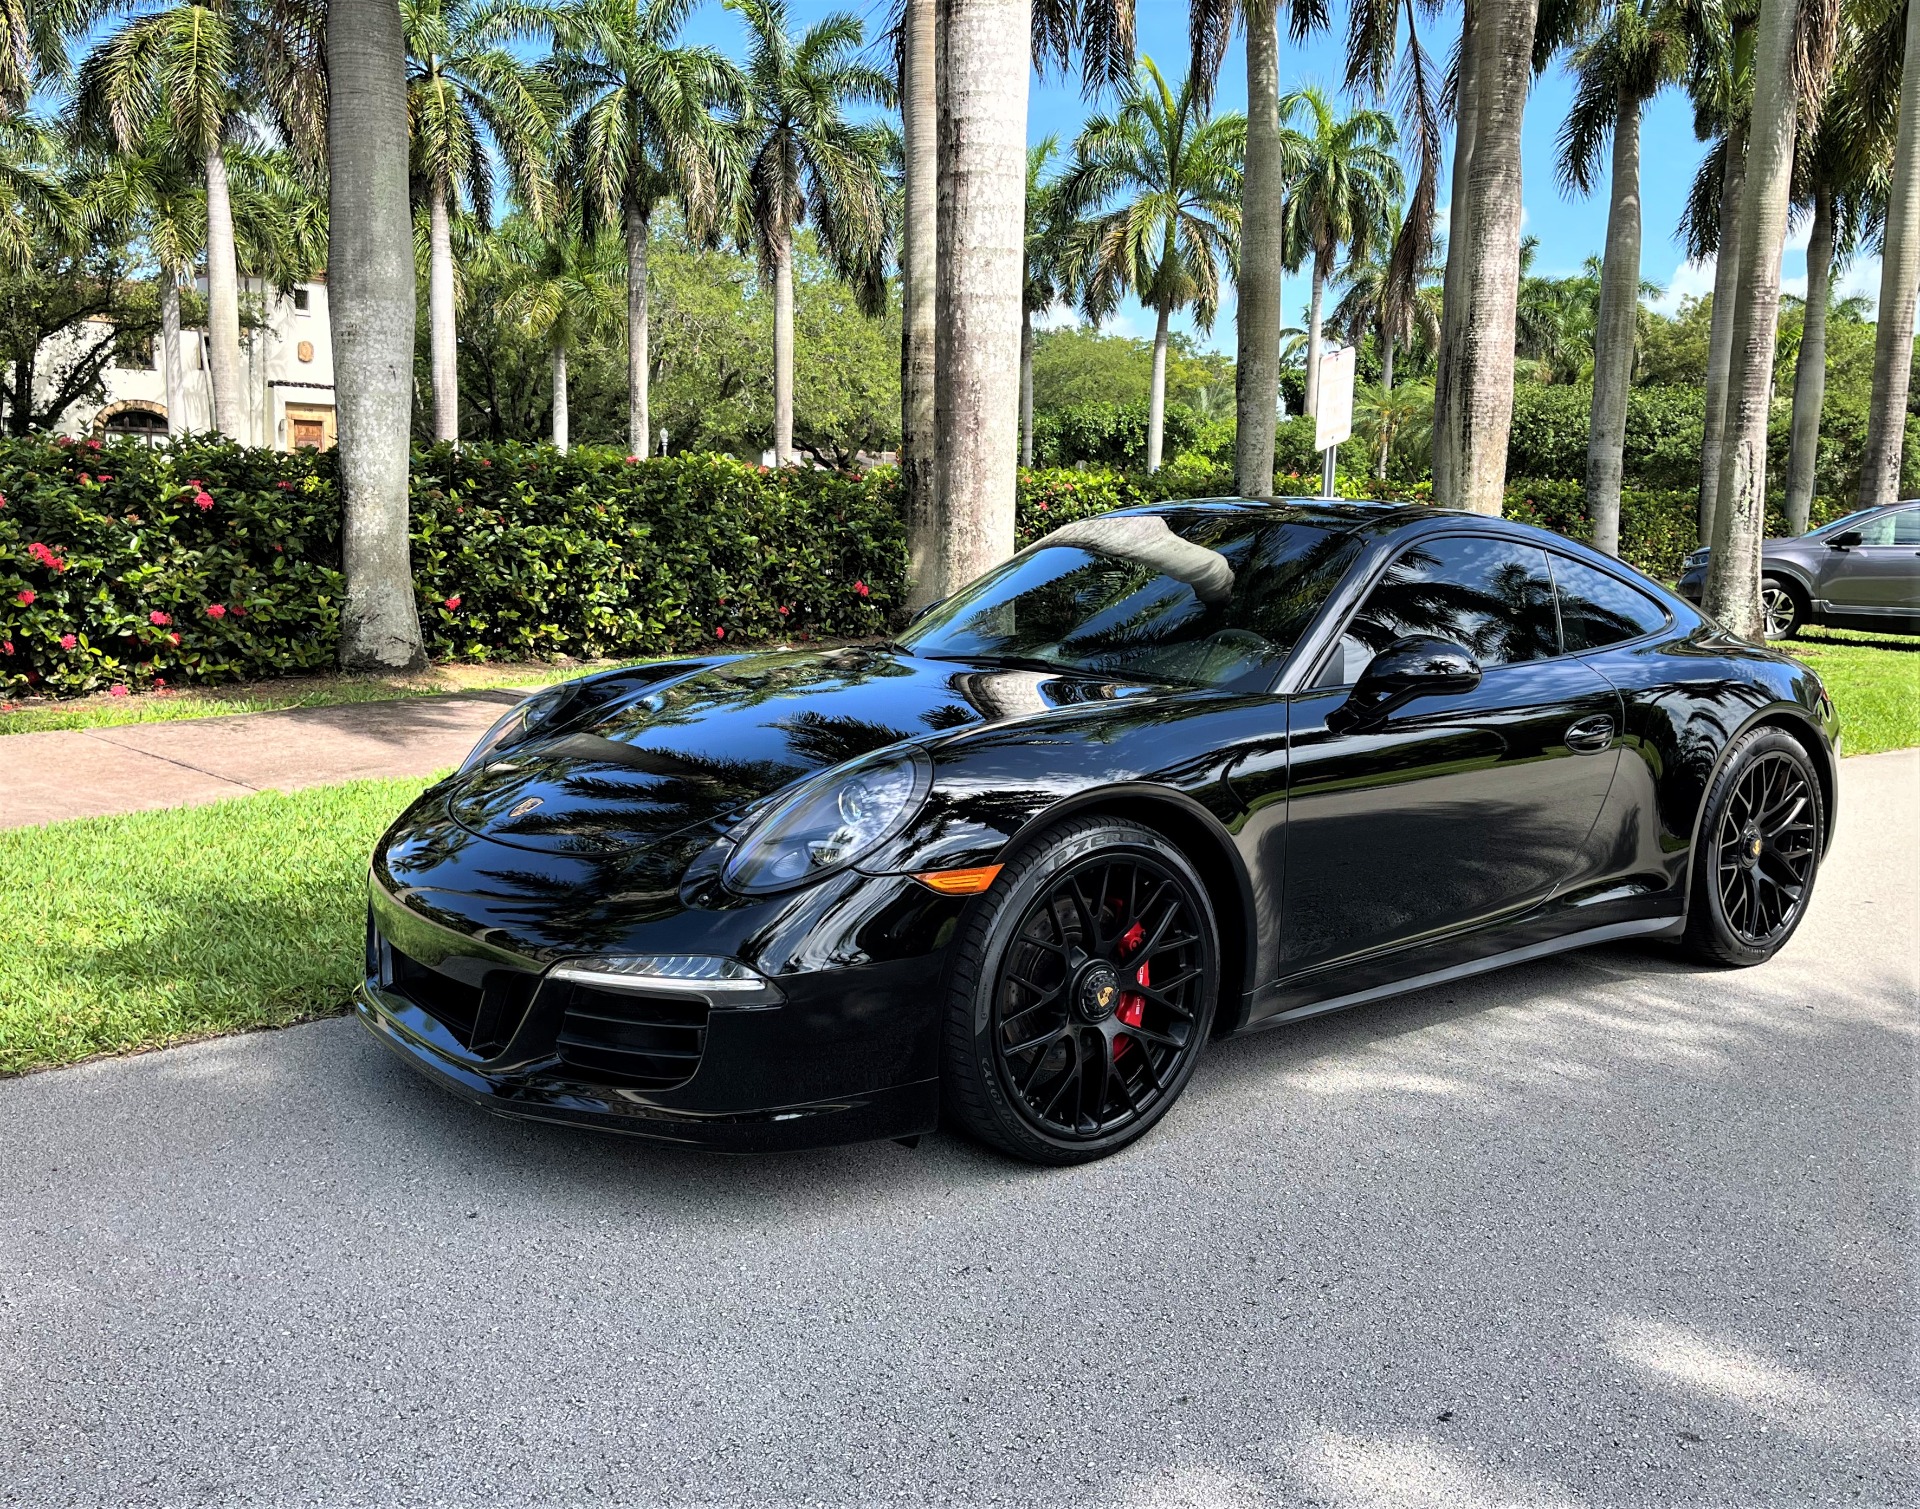 Used 2016 Porsche 911 Carrera 4 GTS for sale Sold at The Gables Sports Cars in Miami FL 33146 4